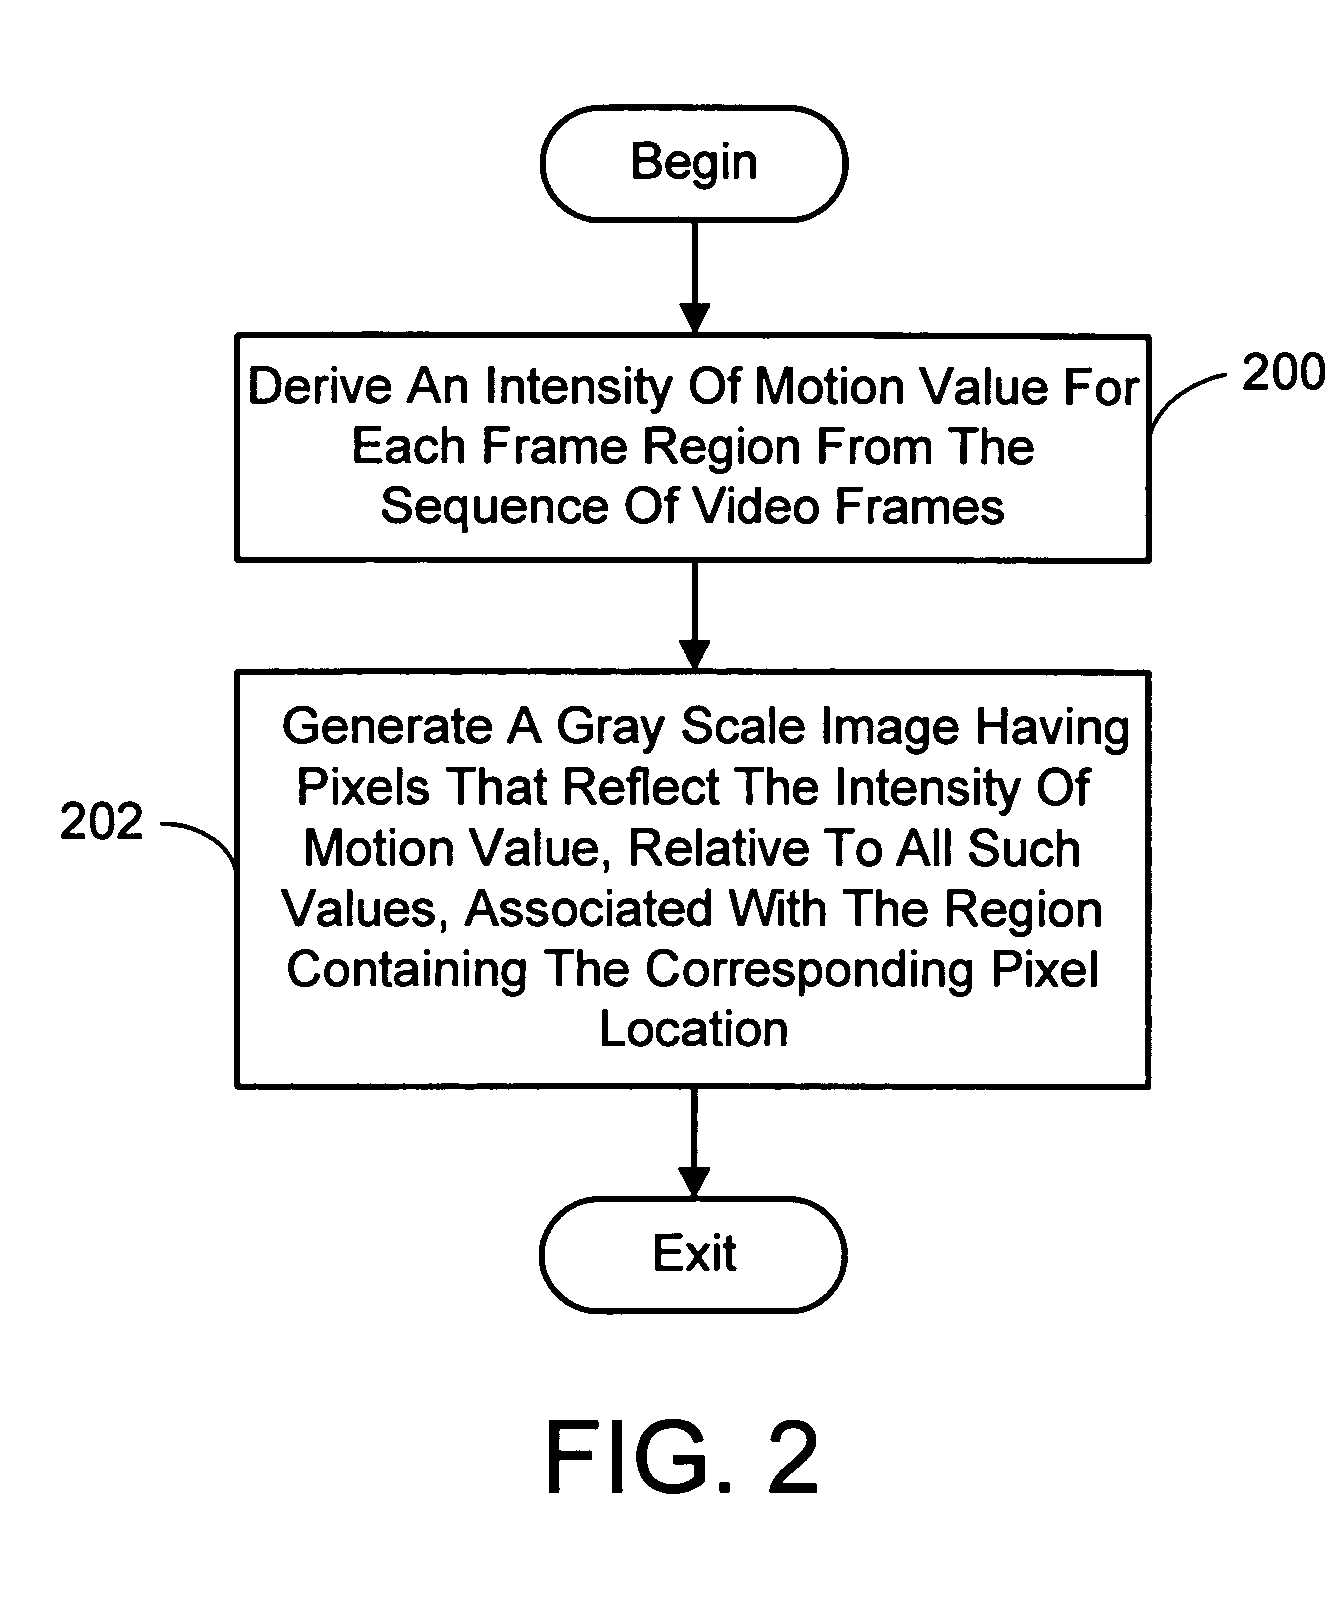 Content-based characterization of video frame sequences